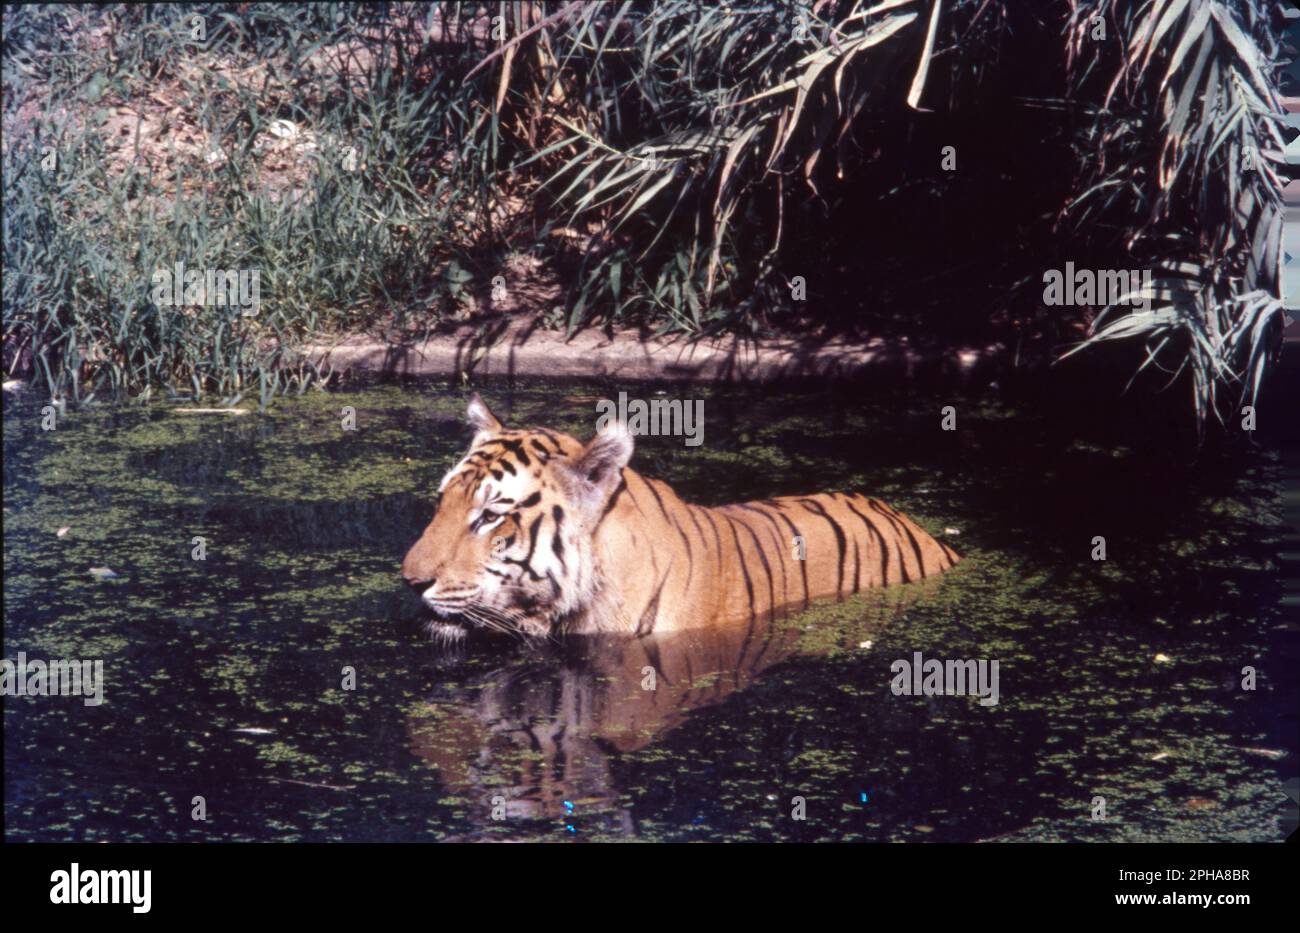 Tigers in India constitute more than 70% of the global population of tigers. Tiger is officially adopted as the National Animal of India. The Bengal tiger is a population of the Panthera tigris tigris subspecies and the nominate Tiger subspecies. It ranks among the biggest wild cats alive today. It is considered to belong to the world's charismatic megafauna. The magnificent tiger, Panthera tigris is a striped animal. It has a thick yellow coat of fur with dark stripes. The combination of grace, strength. Stock Photo